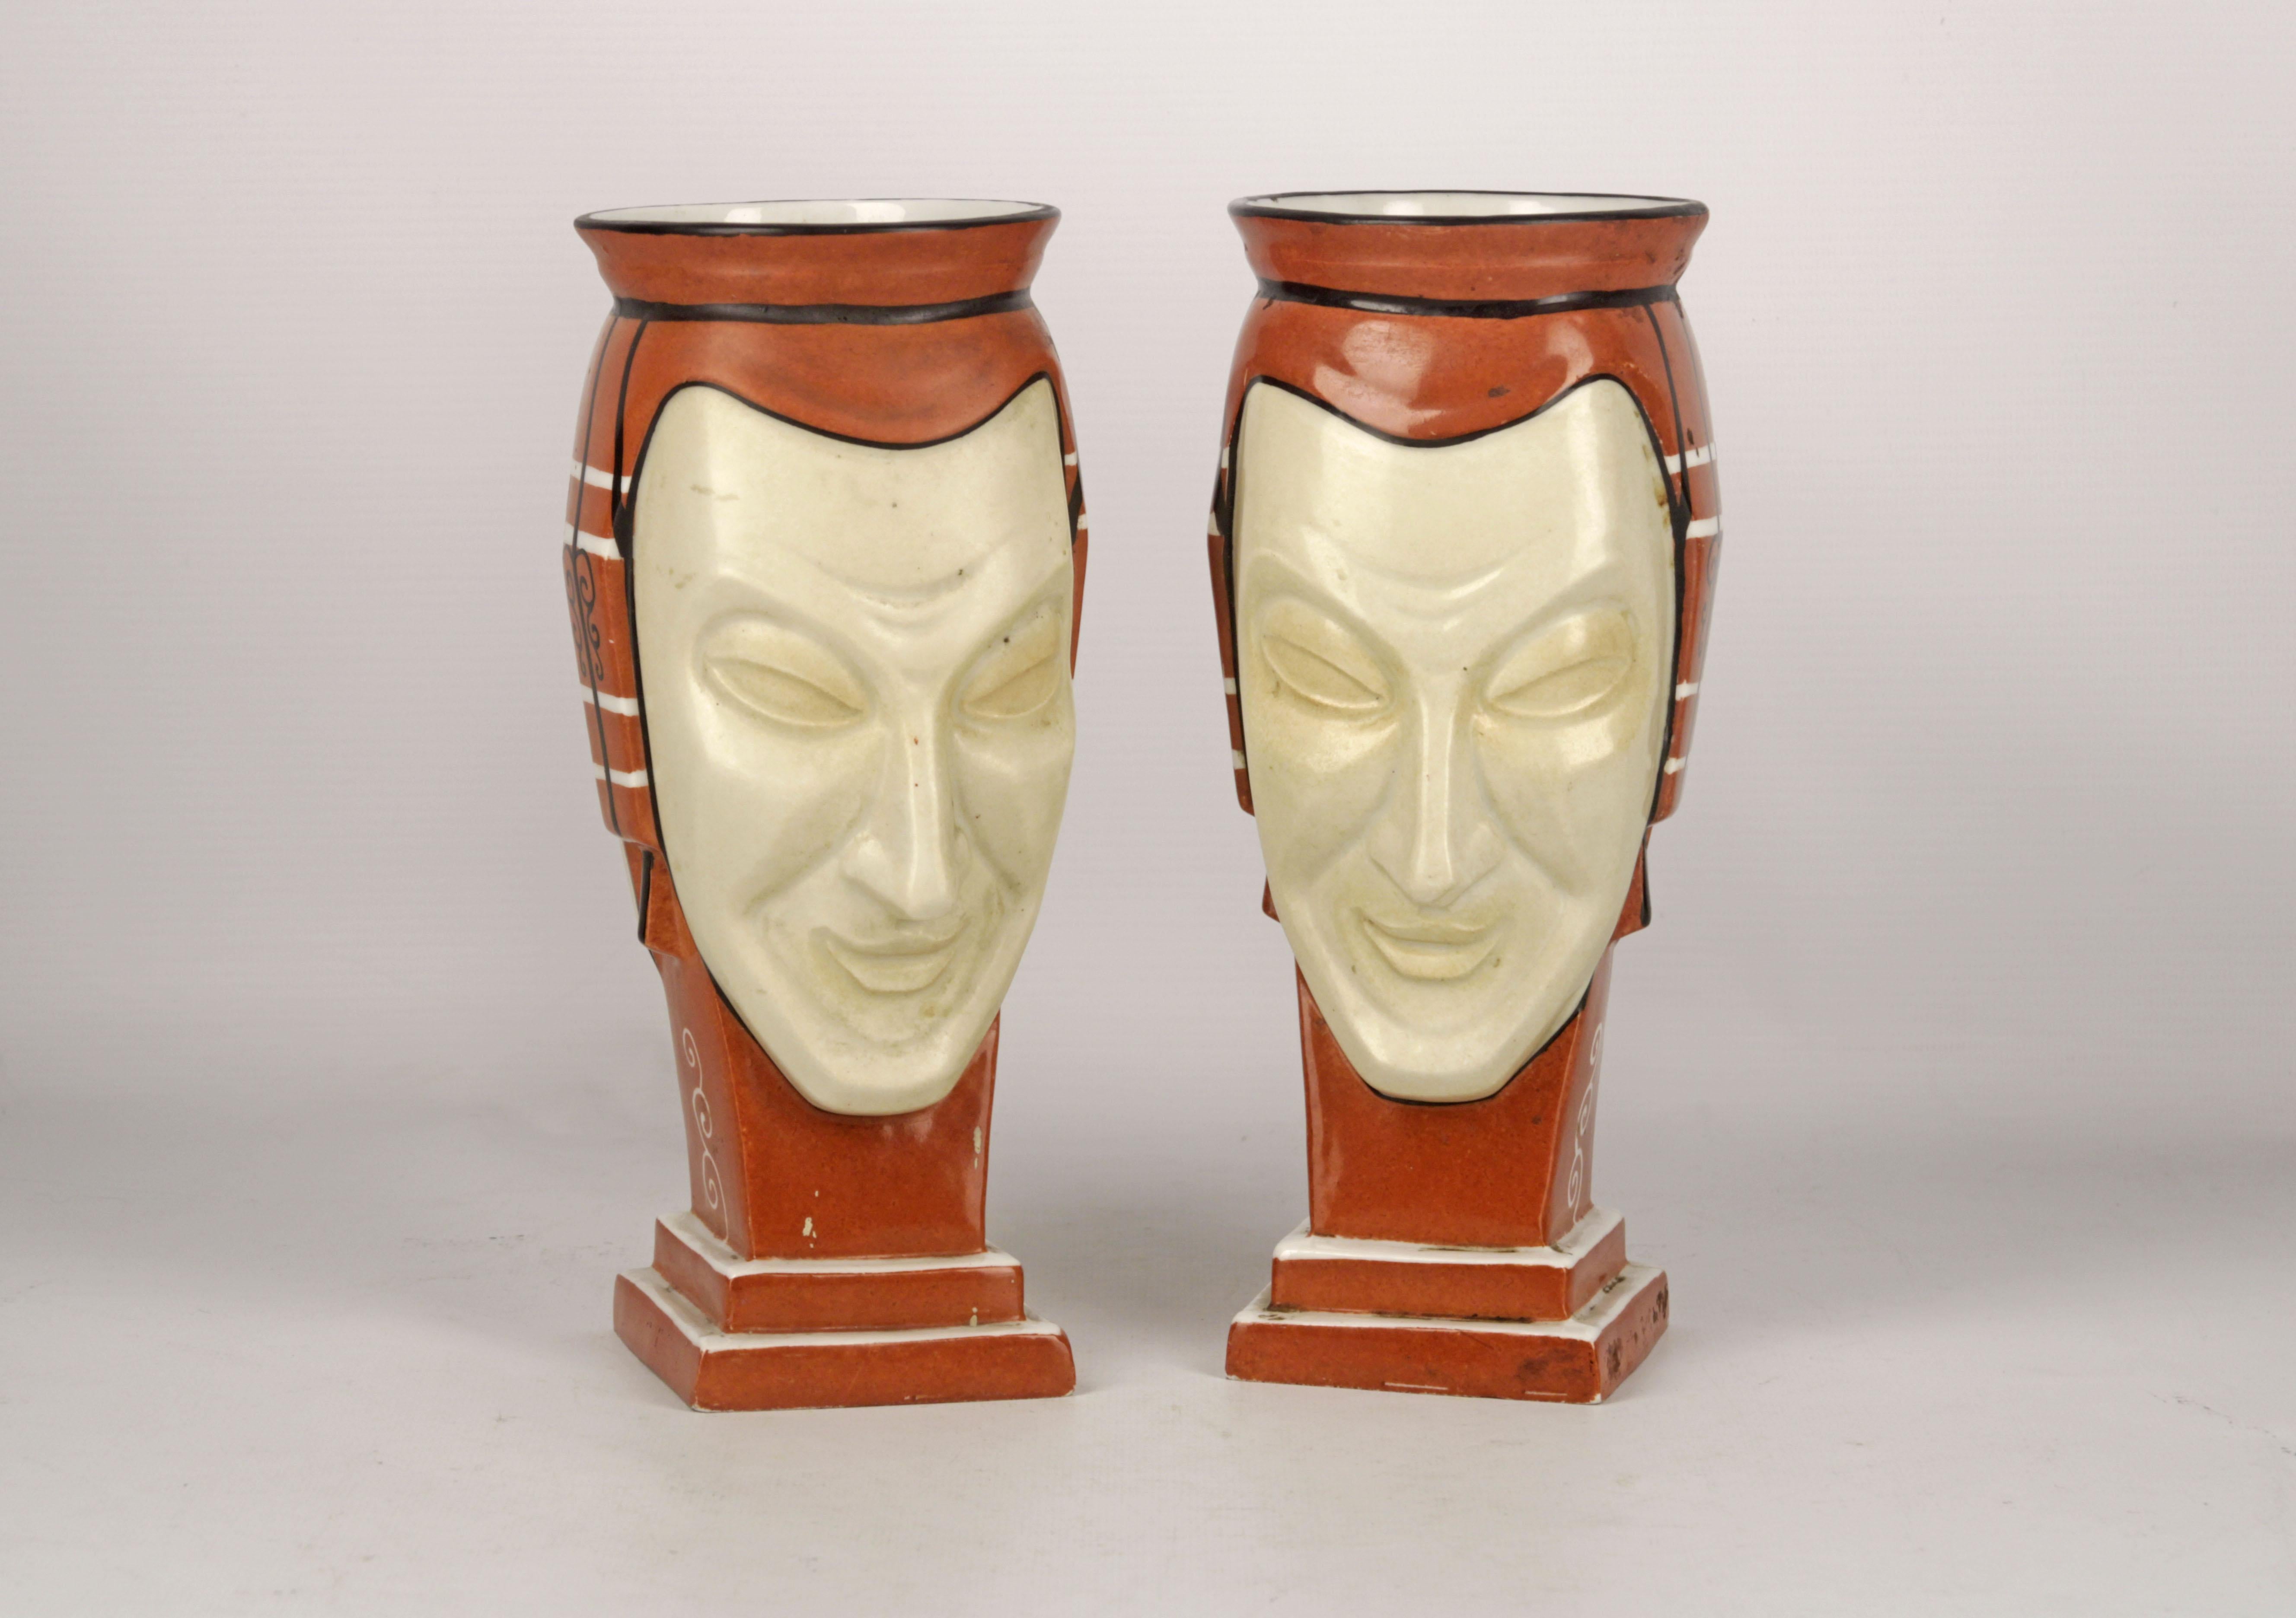 Art Deco Pair of French Vases Made of Porcelain Representing Two Faces Signed by Aladin For Sale